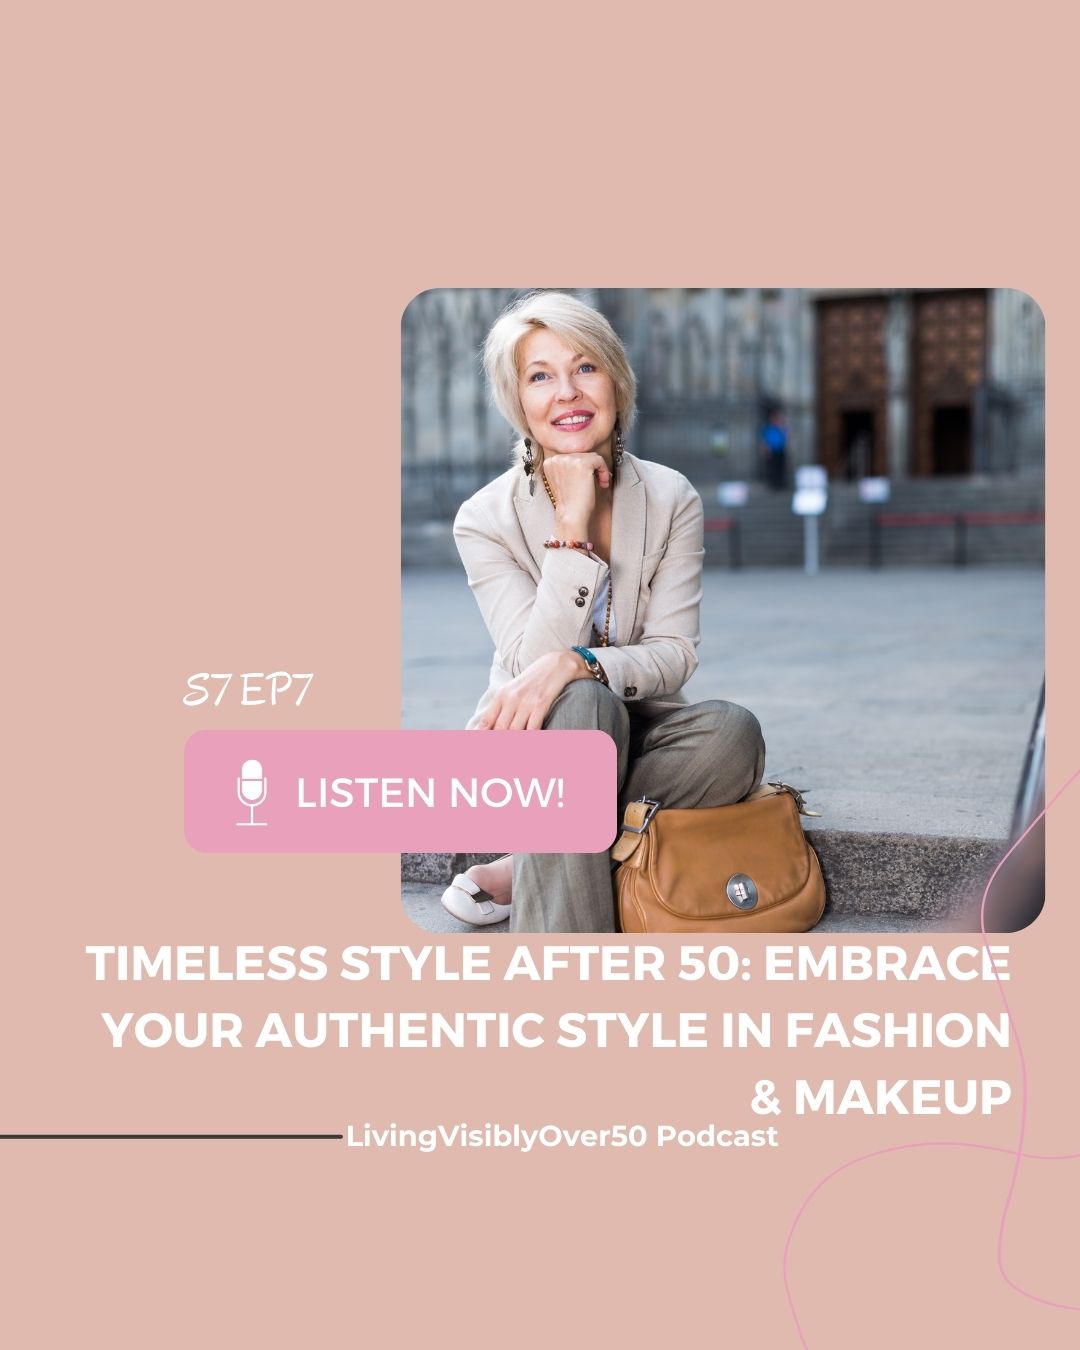 Living Visibly Over 50 podcast - Timeless Style After 50: Embrace Your Authentic Style In Fashion & Makeup. 